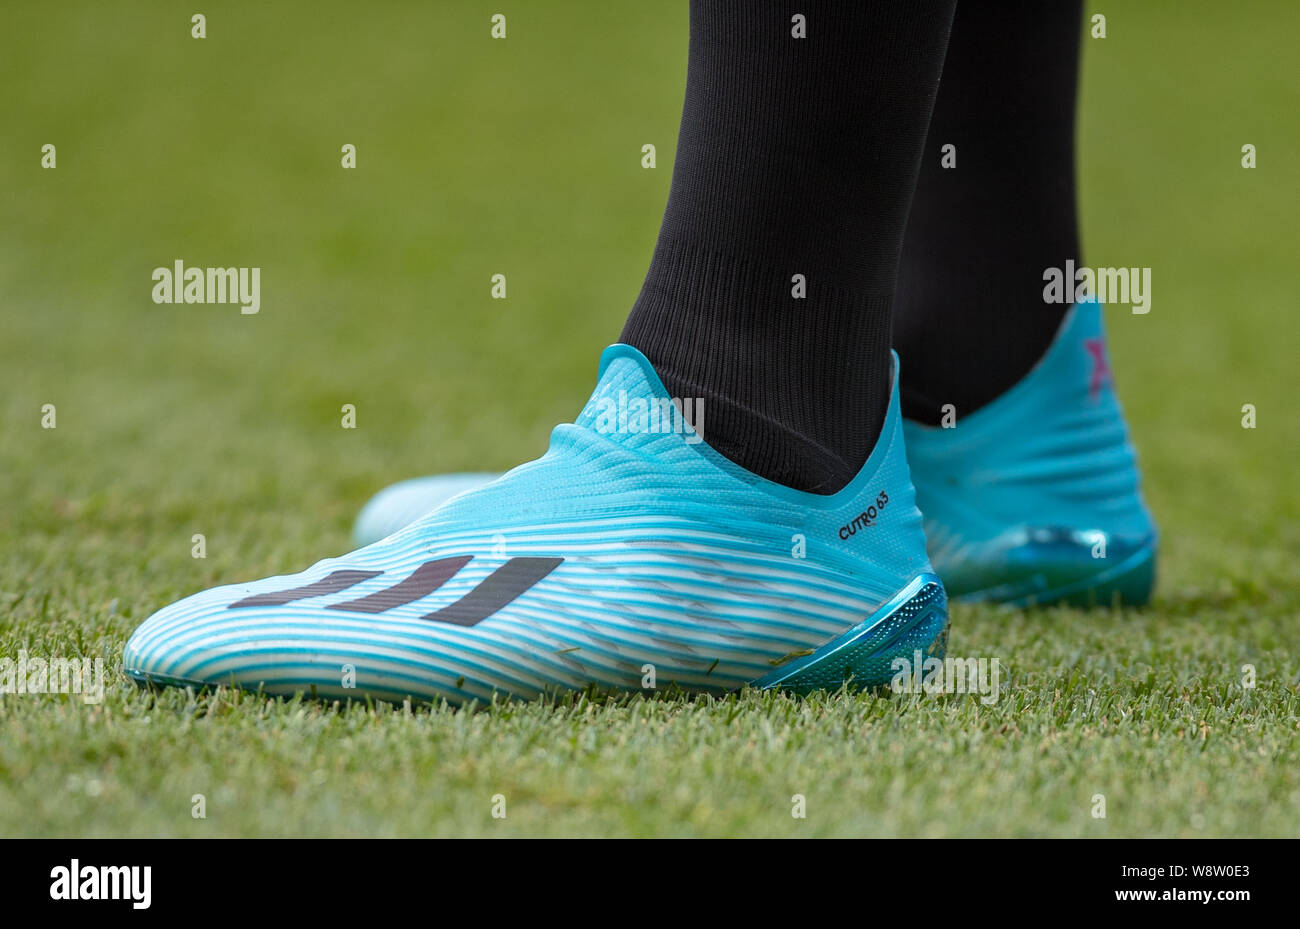 Leicester, UK. 11th Aug, 2019. The Adidas x football boots of Patrick  Cutrone of Wolves displaying CUTRO 63 during the Premier League match  between Leicester City and Wolverhampton Wanderers at the King